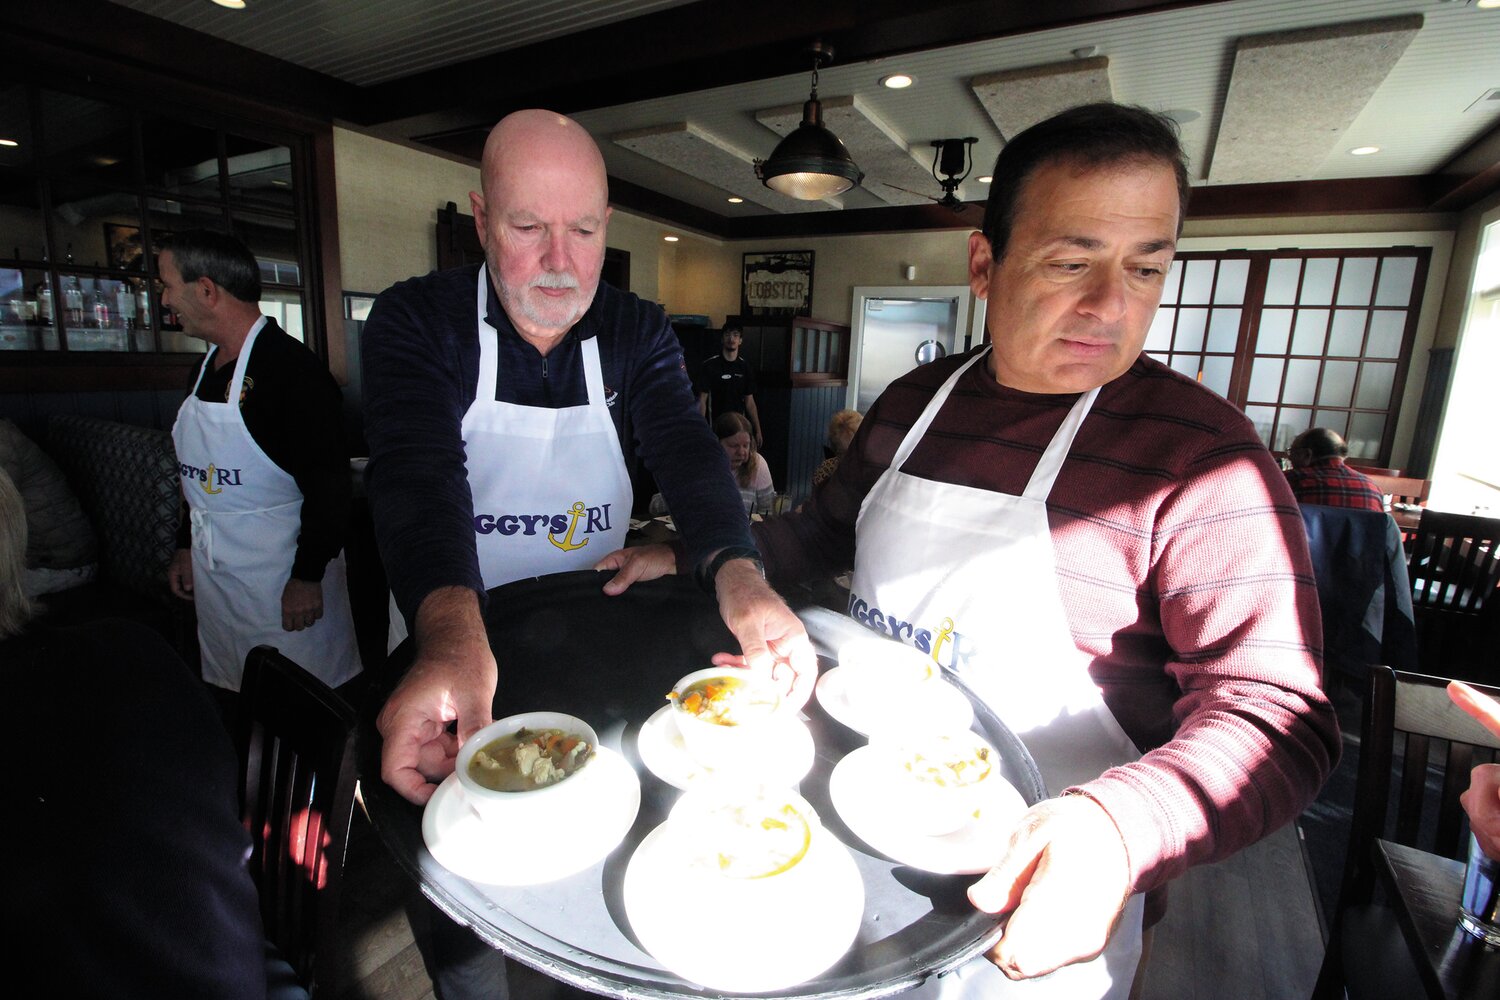 SOUP’S FIRST: Kevin Murphy and House Speaker K. Joseph Shekarchi serve up soup, the first course to a turkey dinner at Iggy’s Boardwalk.